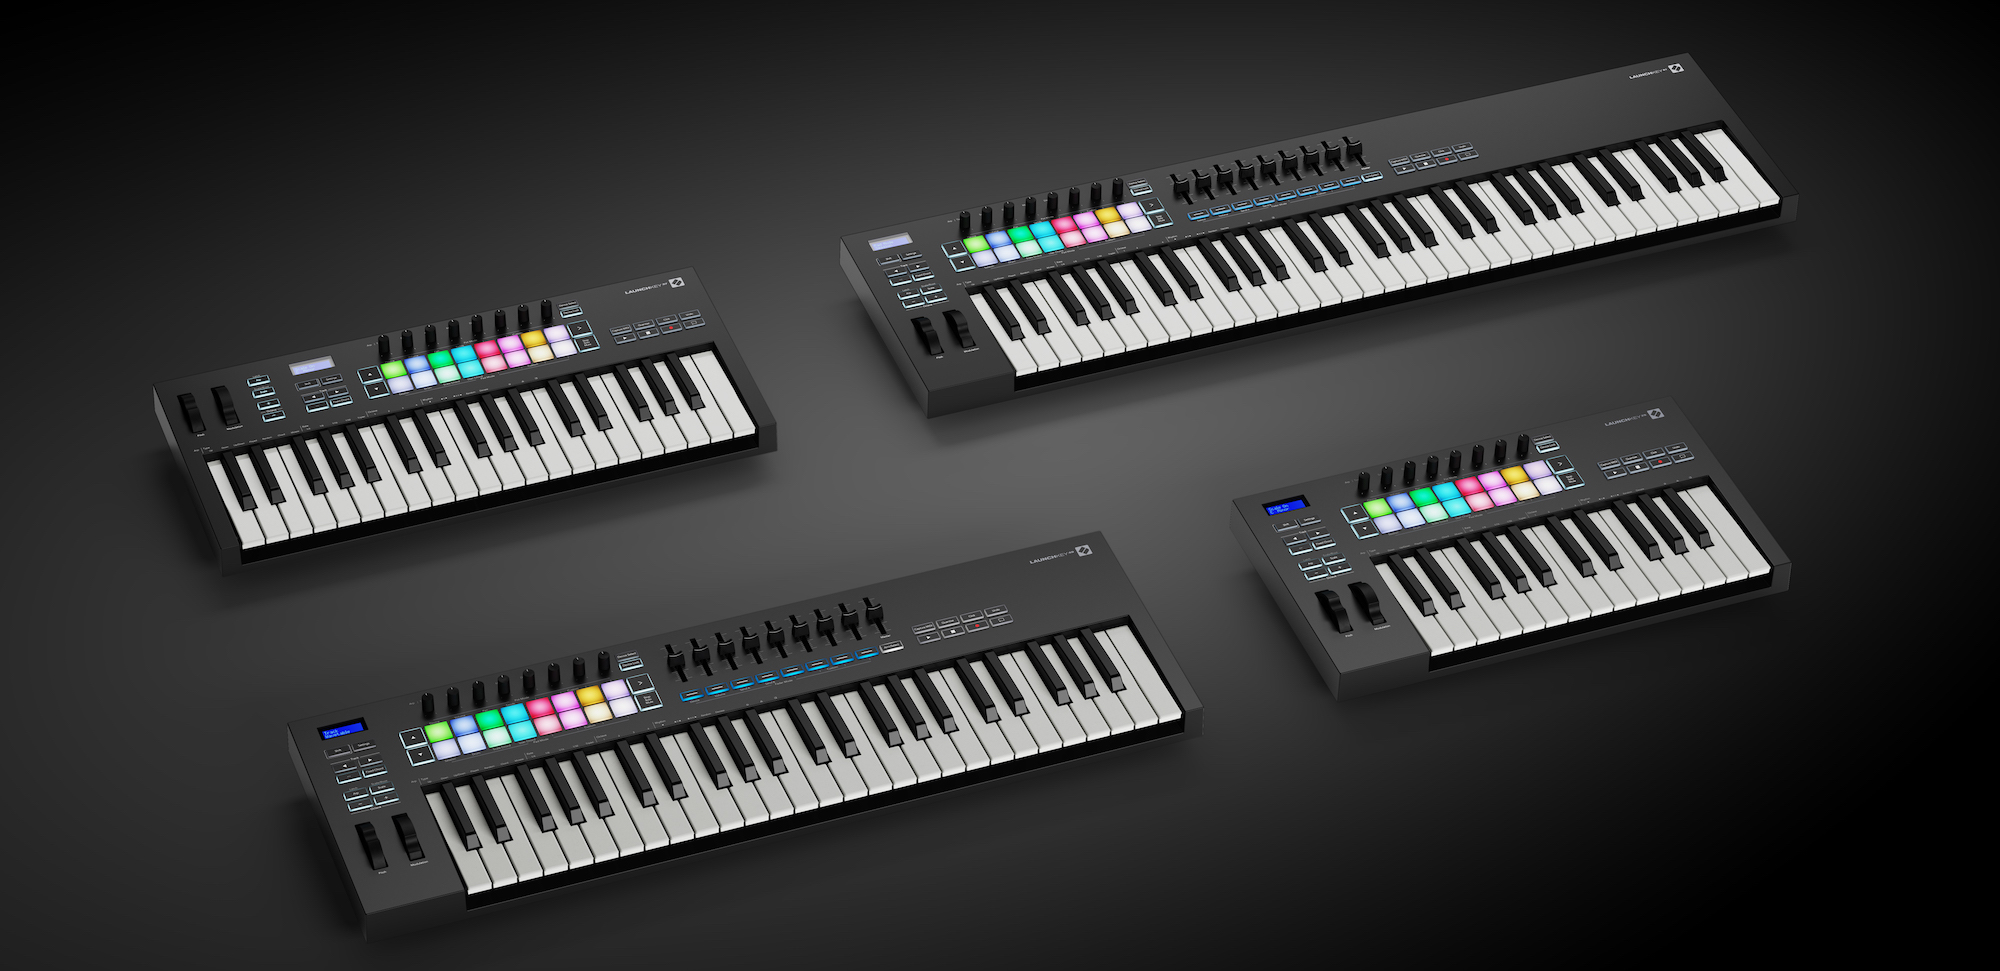 piano keyboards for macbook pro